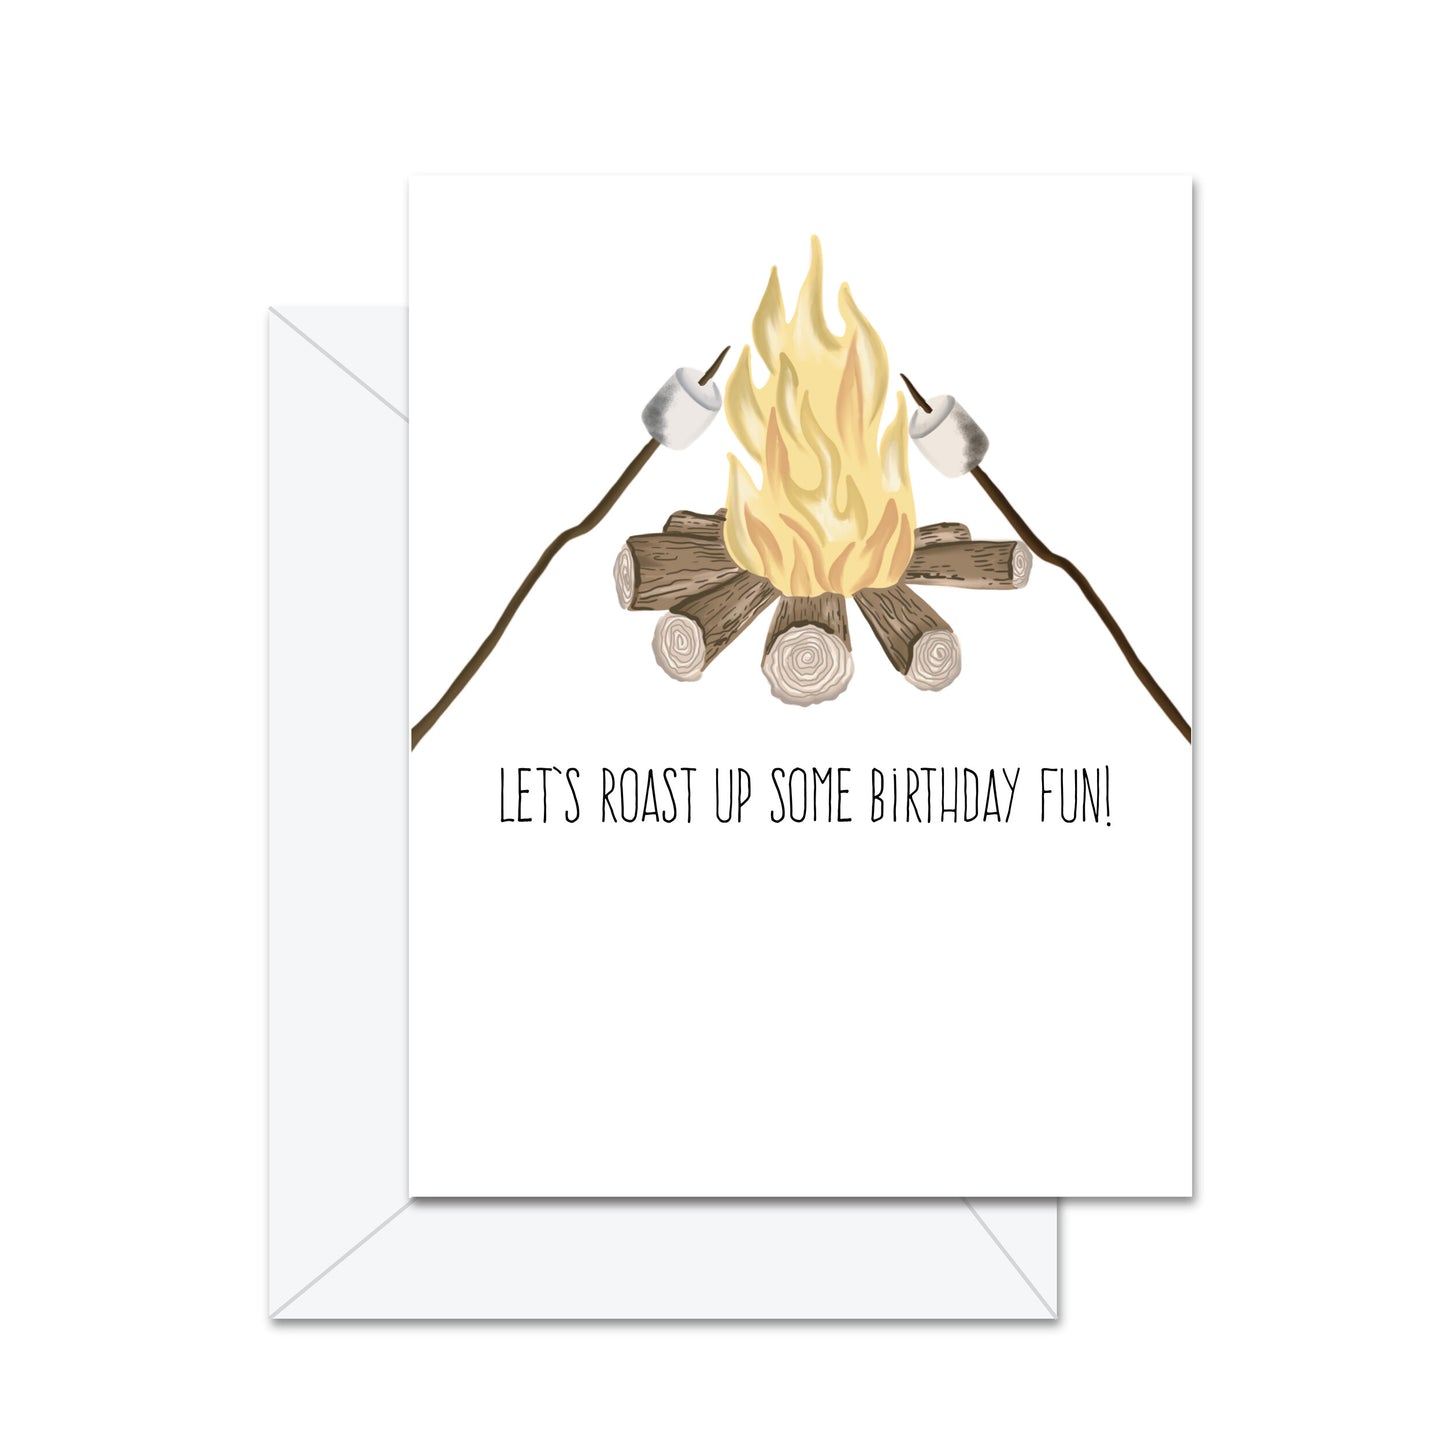 Let's Roast Up Some Birthday Fun! - Greeting Card